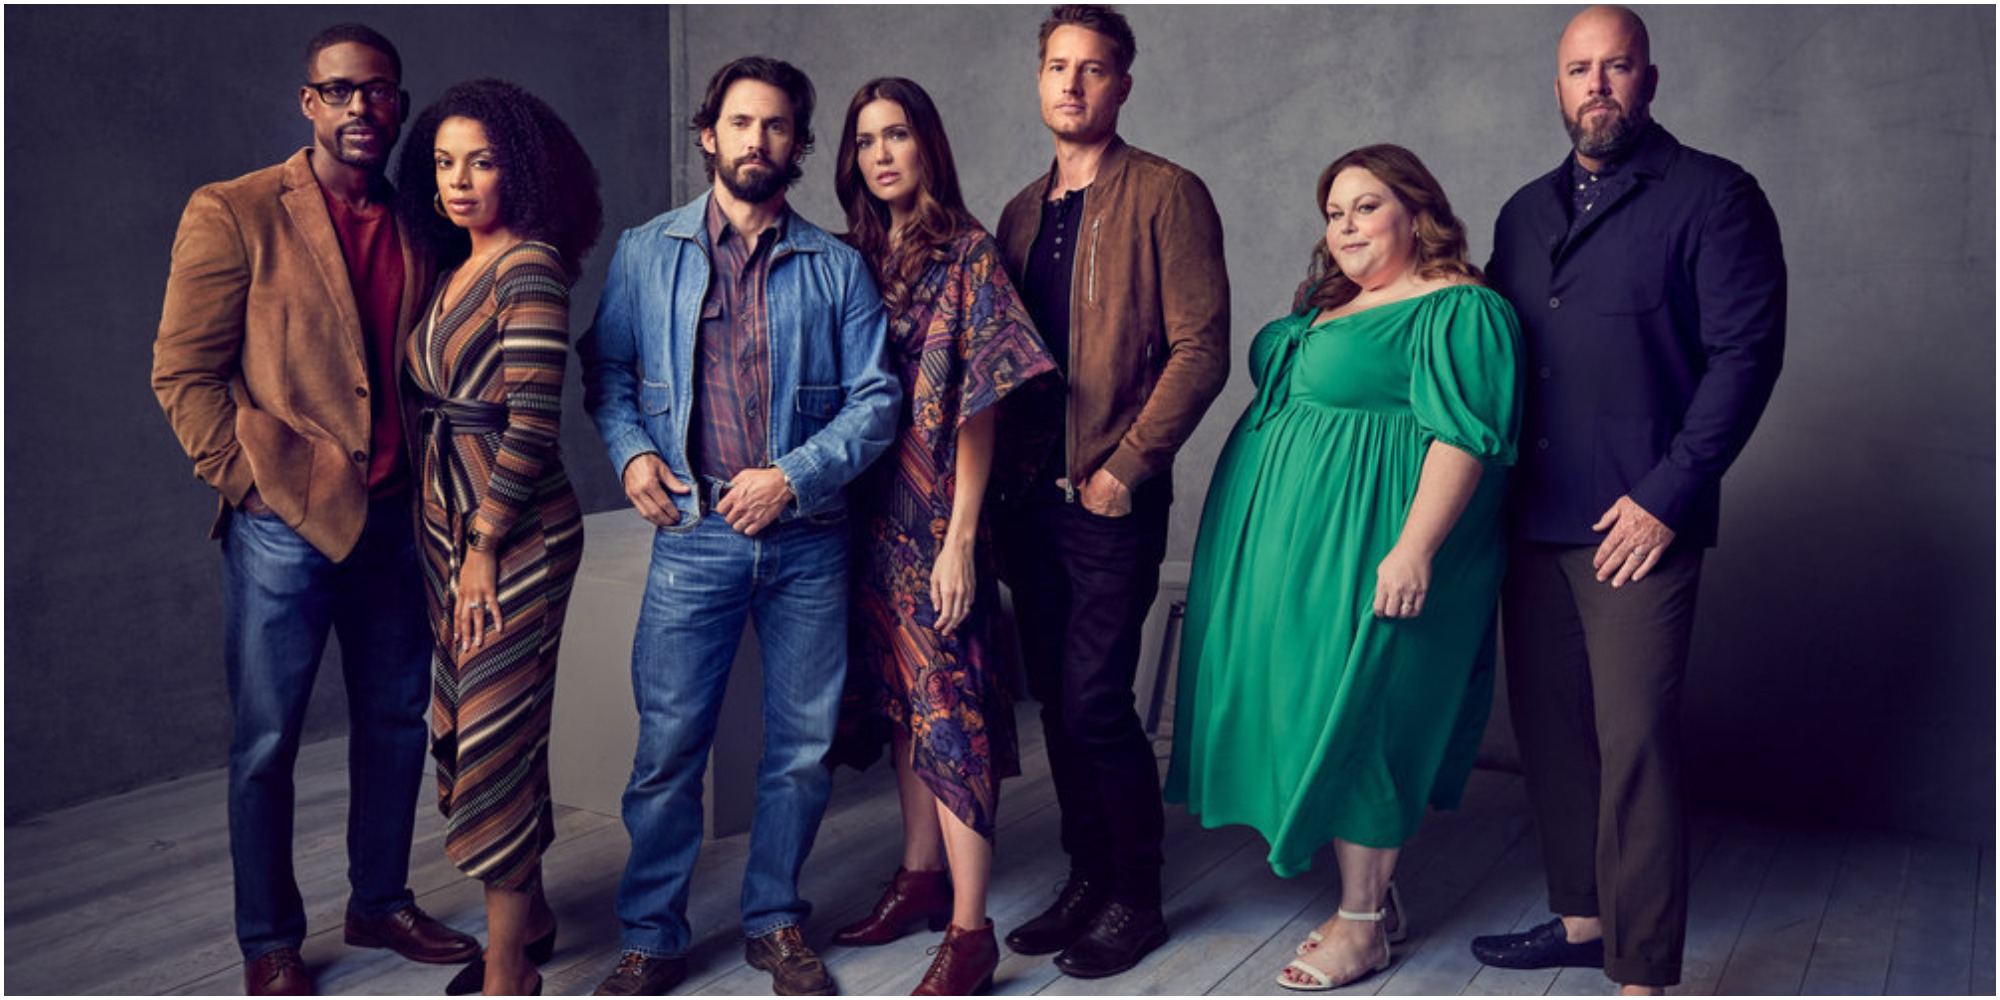 The cast of 'This Is Us' Sterling K Brown, Susan Kelechi Watson, Milo Ventimiglia, Mandy Moore, Justin Hartley, Chrissy Metz, and Chris Sullivan